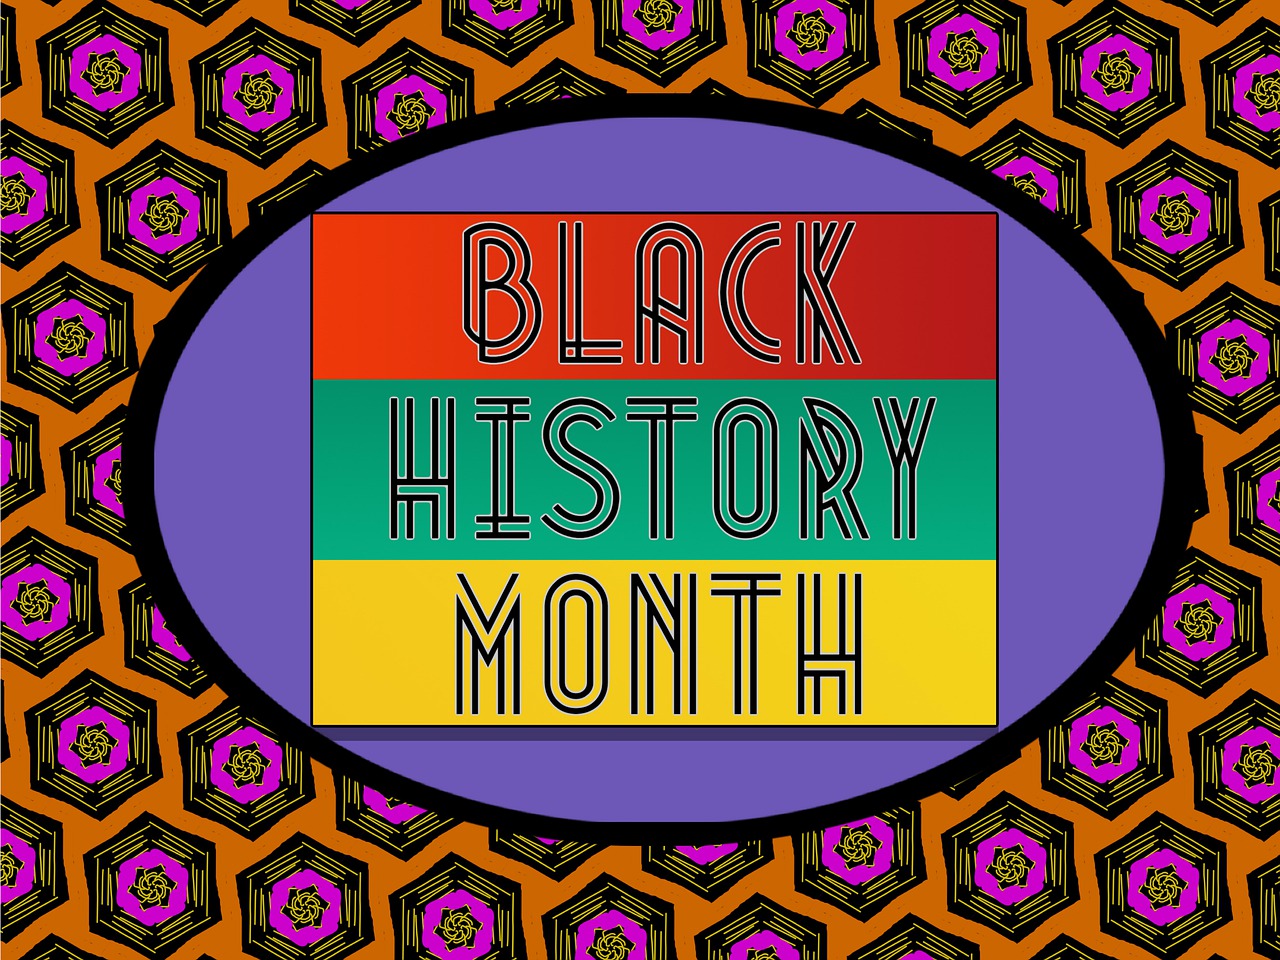 The words Black History Month highlighted in red, green and yellow in a purple oval with and orange hexagon pattern background